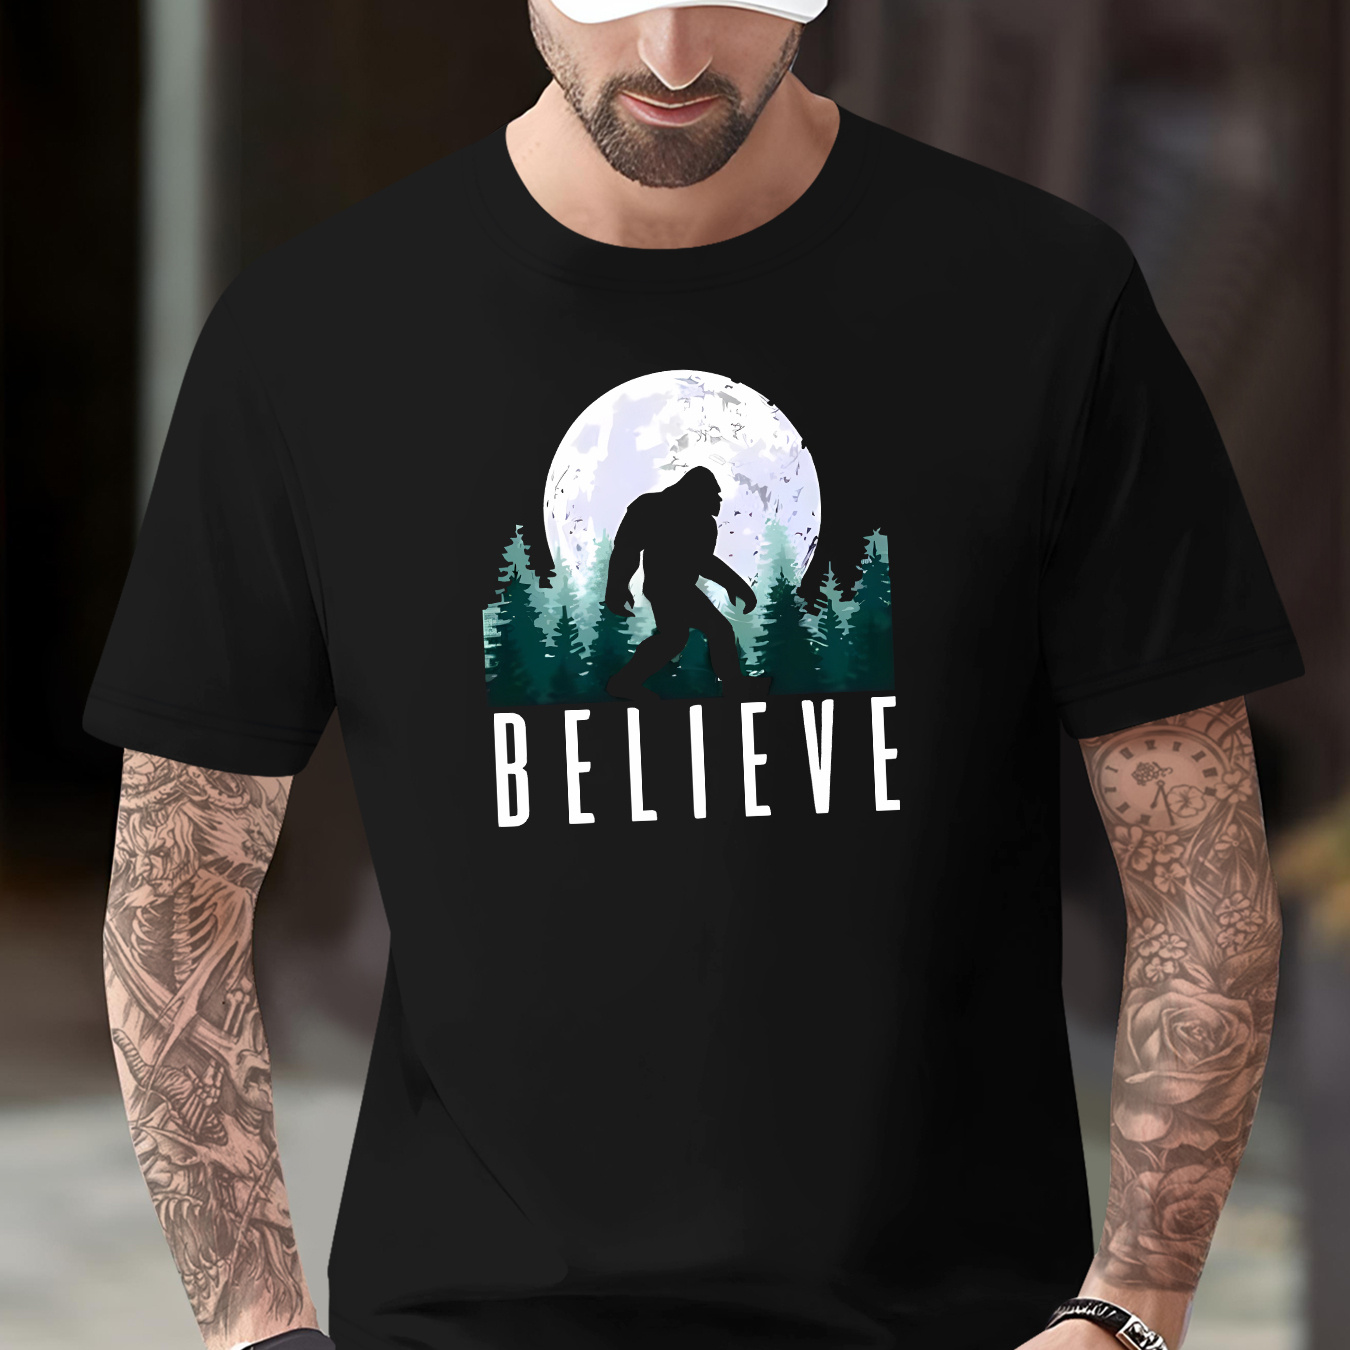 

'believe ' Letters And Sasquatch Pattern Print Men's Crew Neck Short Sleeve T-shirt, Slightly Elastic, Summer Casual And Breathable Top For Outdoor Fitness & Daily Commute